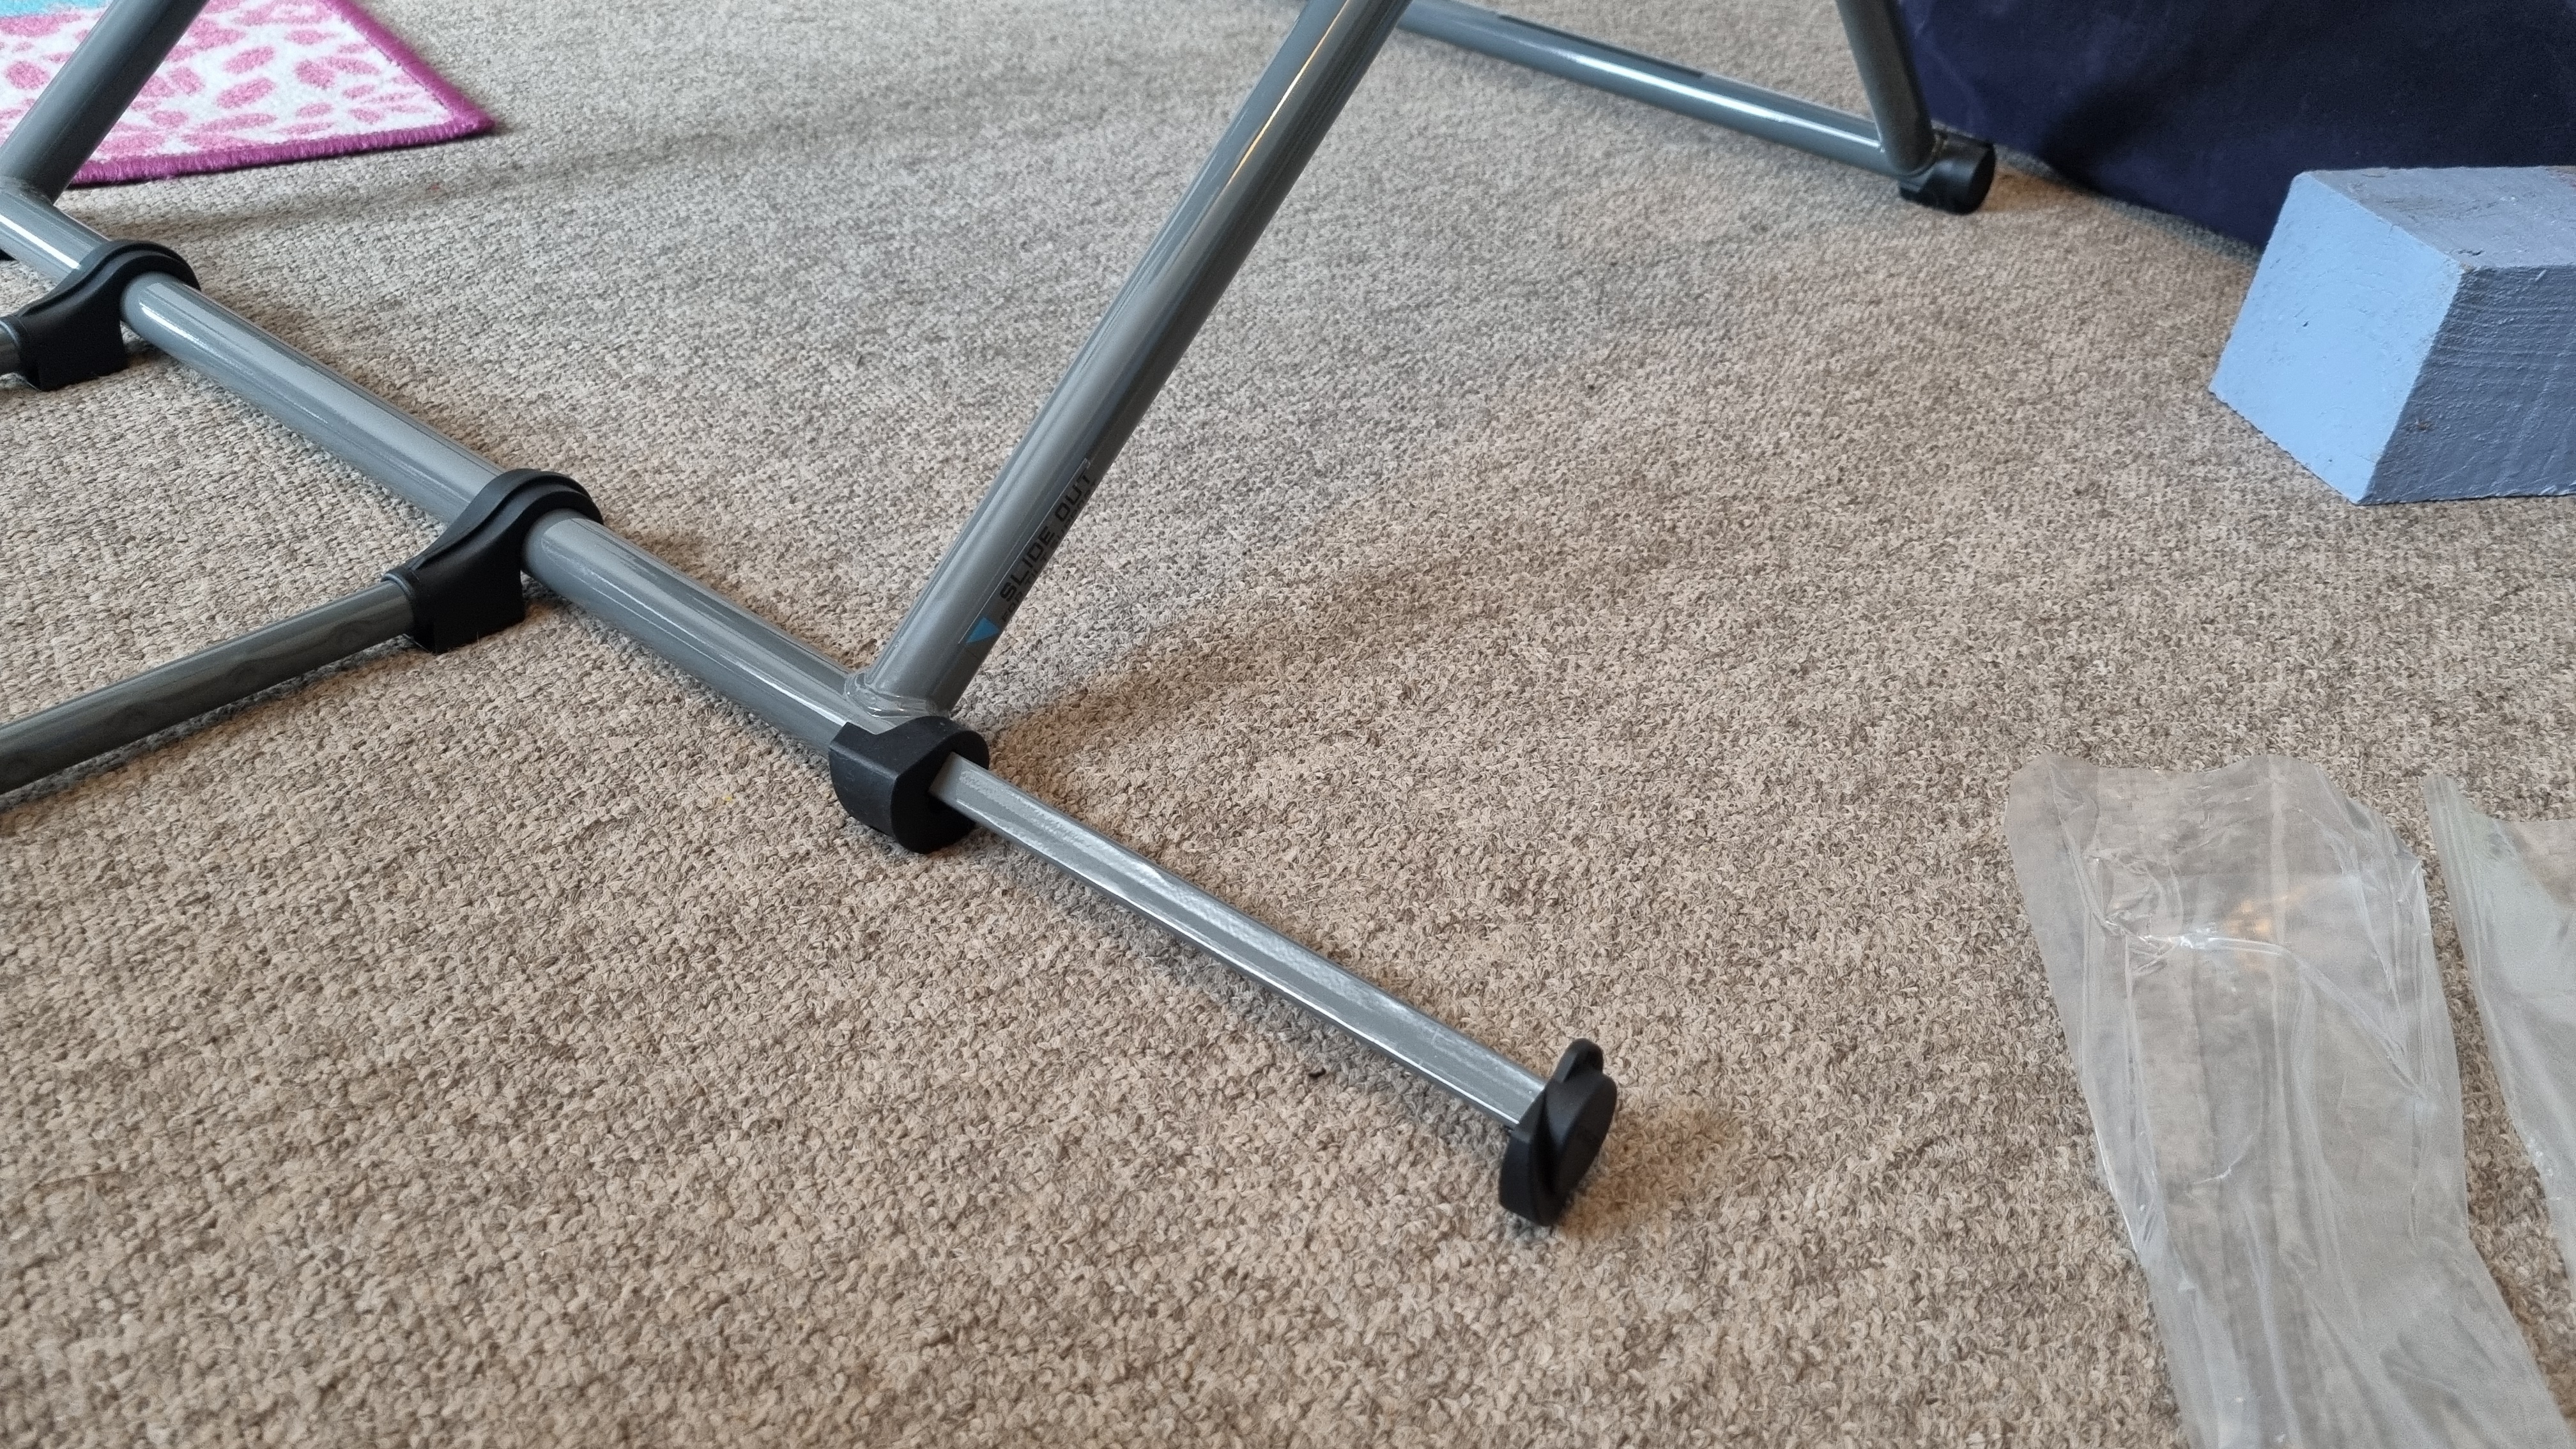 The extendable leg on the Logitech Playseat Challenge X that prevents it from tipping over